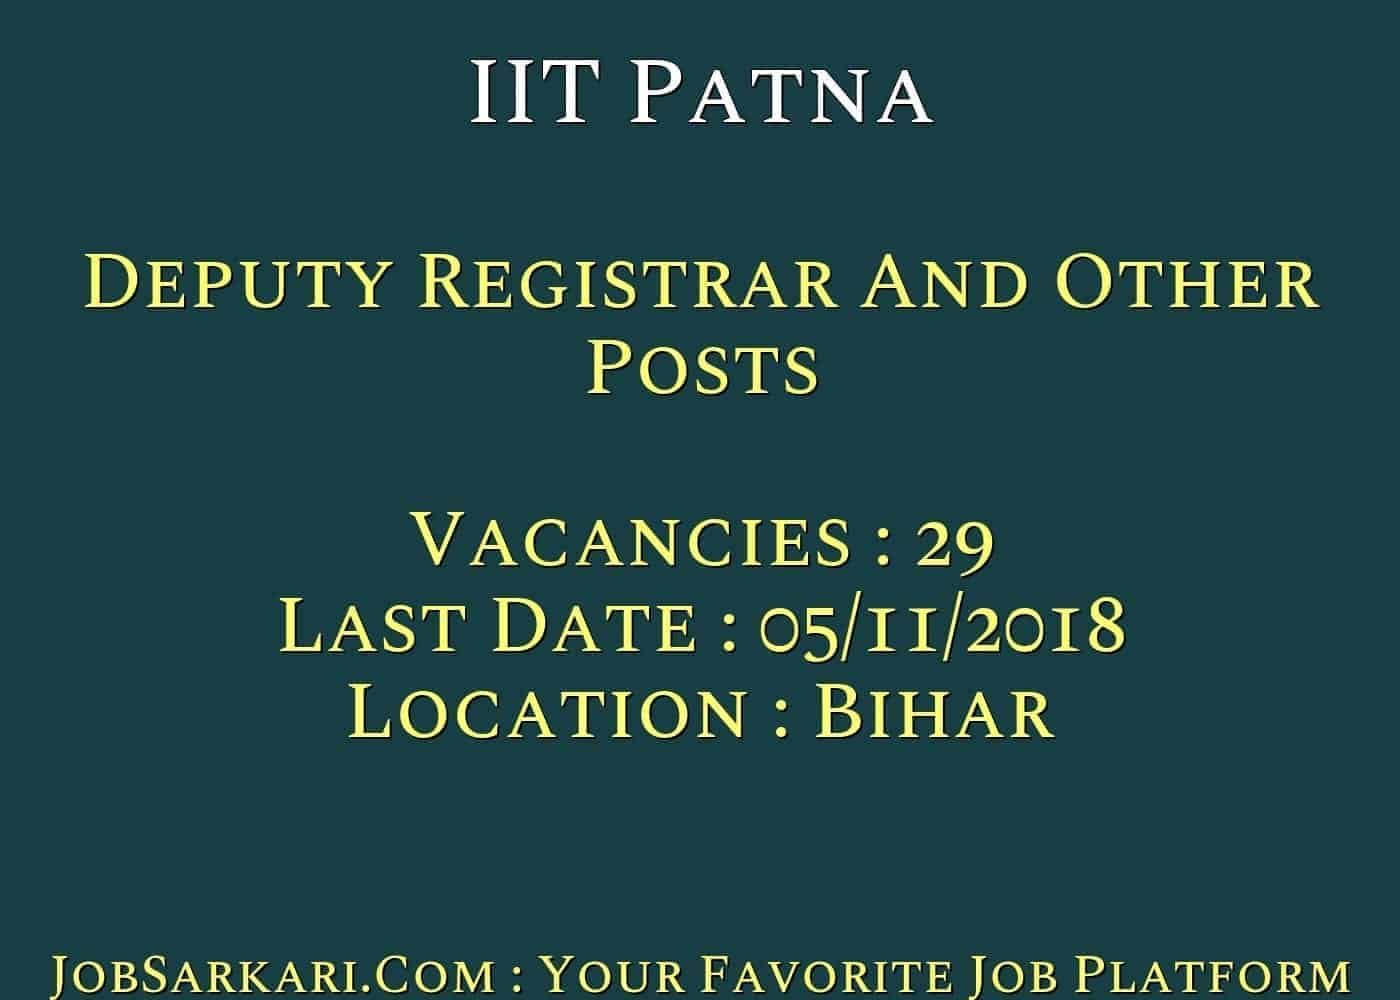 IIT Patna Recruitment 2018 For Deputy Registrar And Other Posts